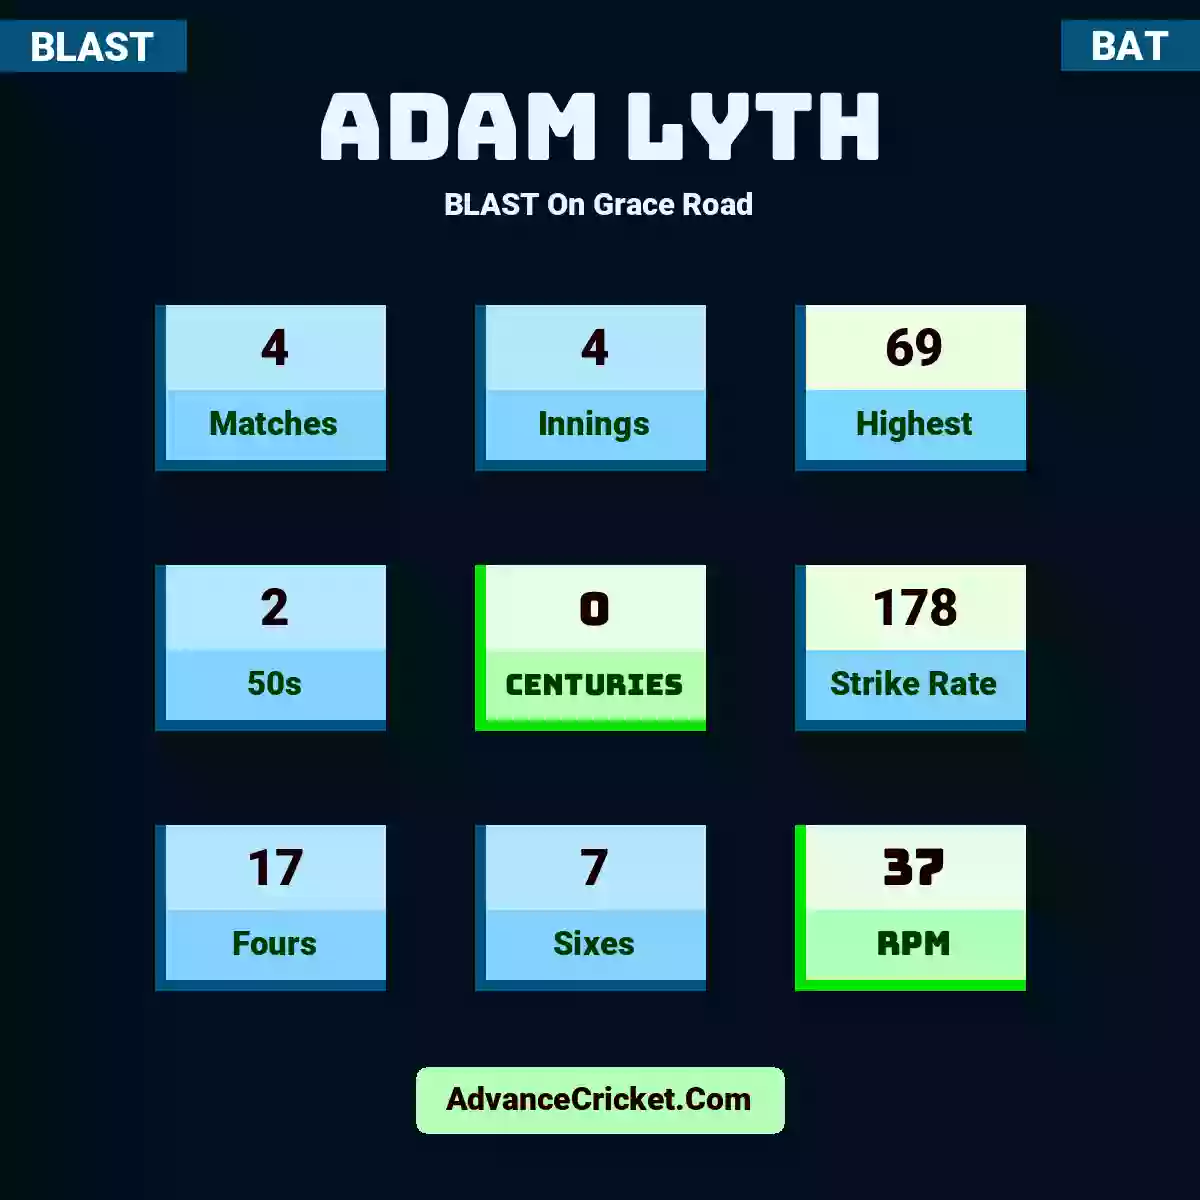 Adam Lyth BLAST  On Grace Road, Adam Lyth played 4 matches, scored 69 runs as highest, 2 half-centuries, and 0 centuries, with a strike rate of 178. A.Lyth hit 17 fours and 7 sixes, with an RPM of 37.